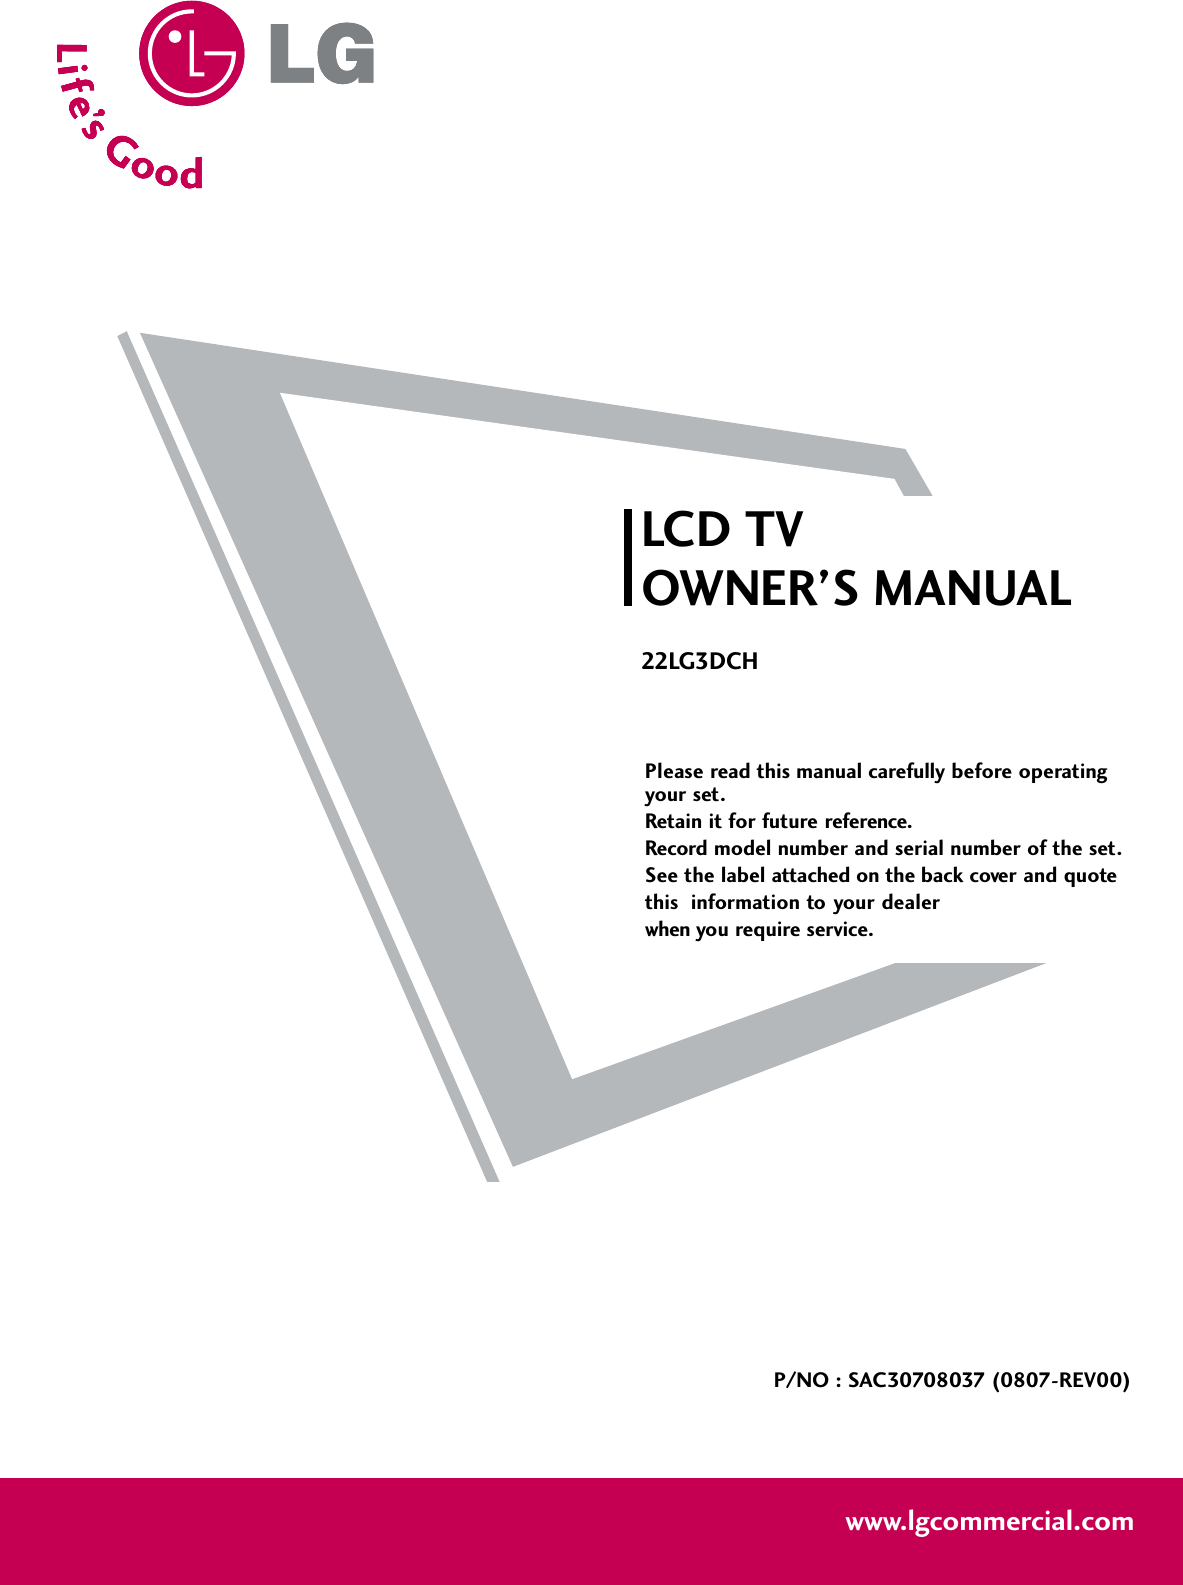 Please read this manual carefully before operatingyour set. Retain it for future reference.Record model number and serial number of the set. See the label attached on the back cover and quote this  information to your dealer when you require service.LCD TVOWNER’S MANUAL22LG3DCHP/NO : SAC30708037 (0807-REV00)www.lgcommercial.com